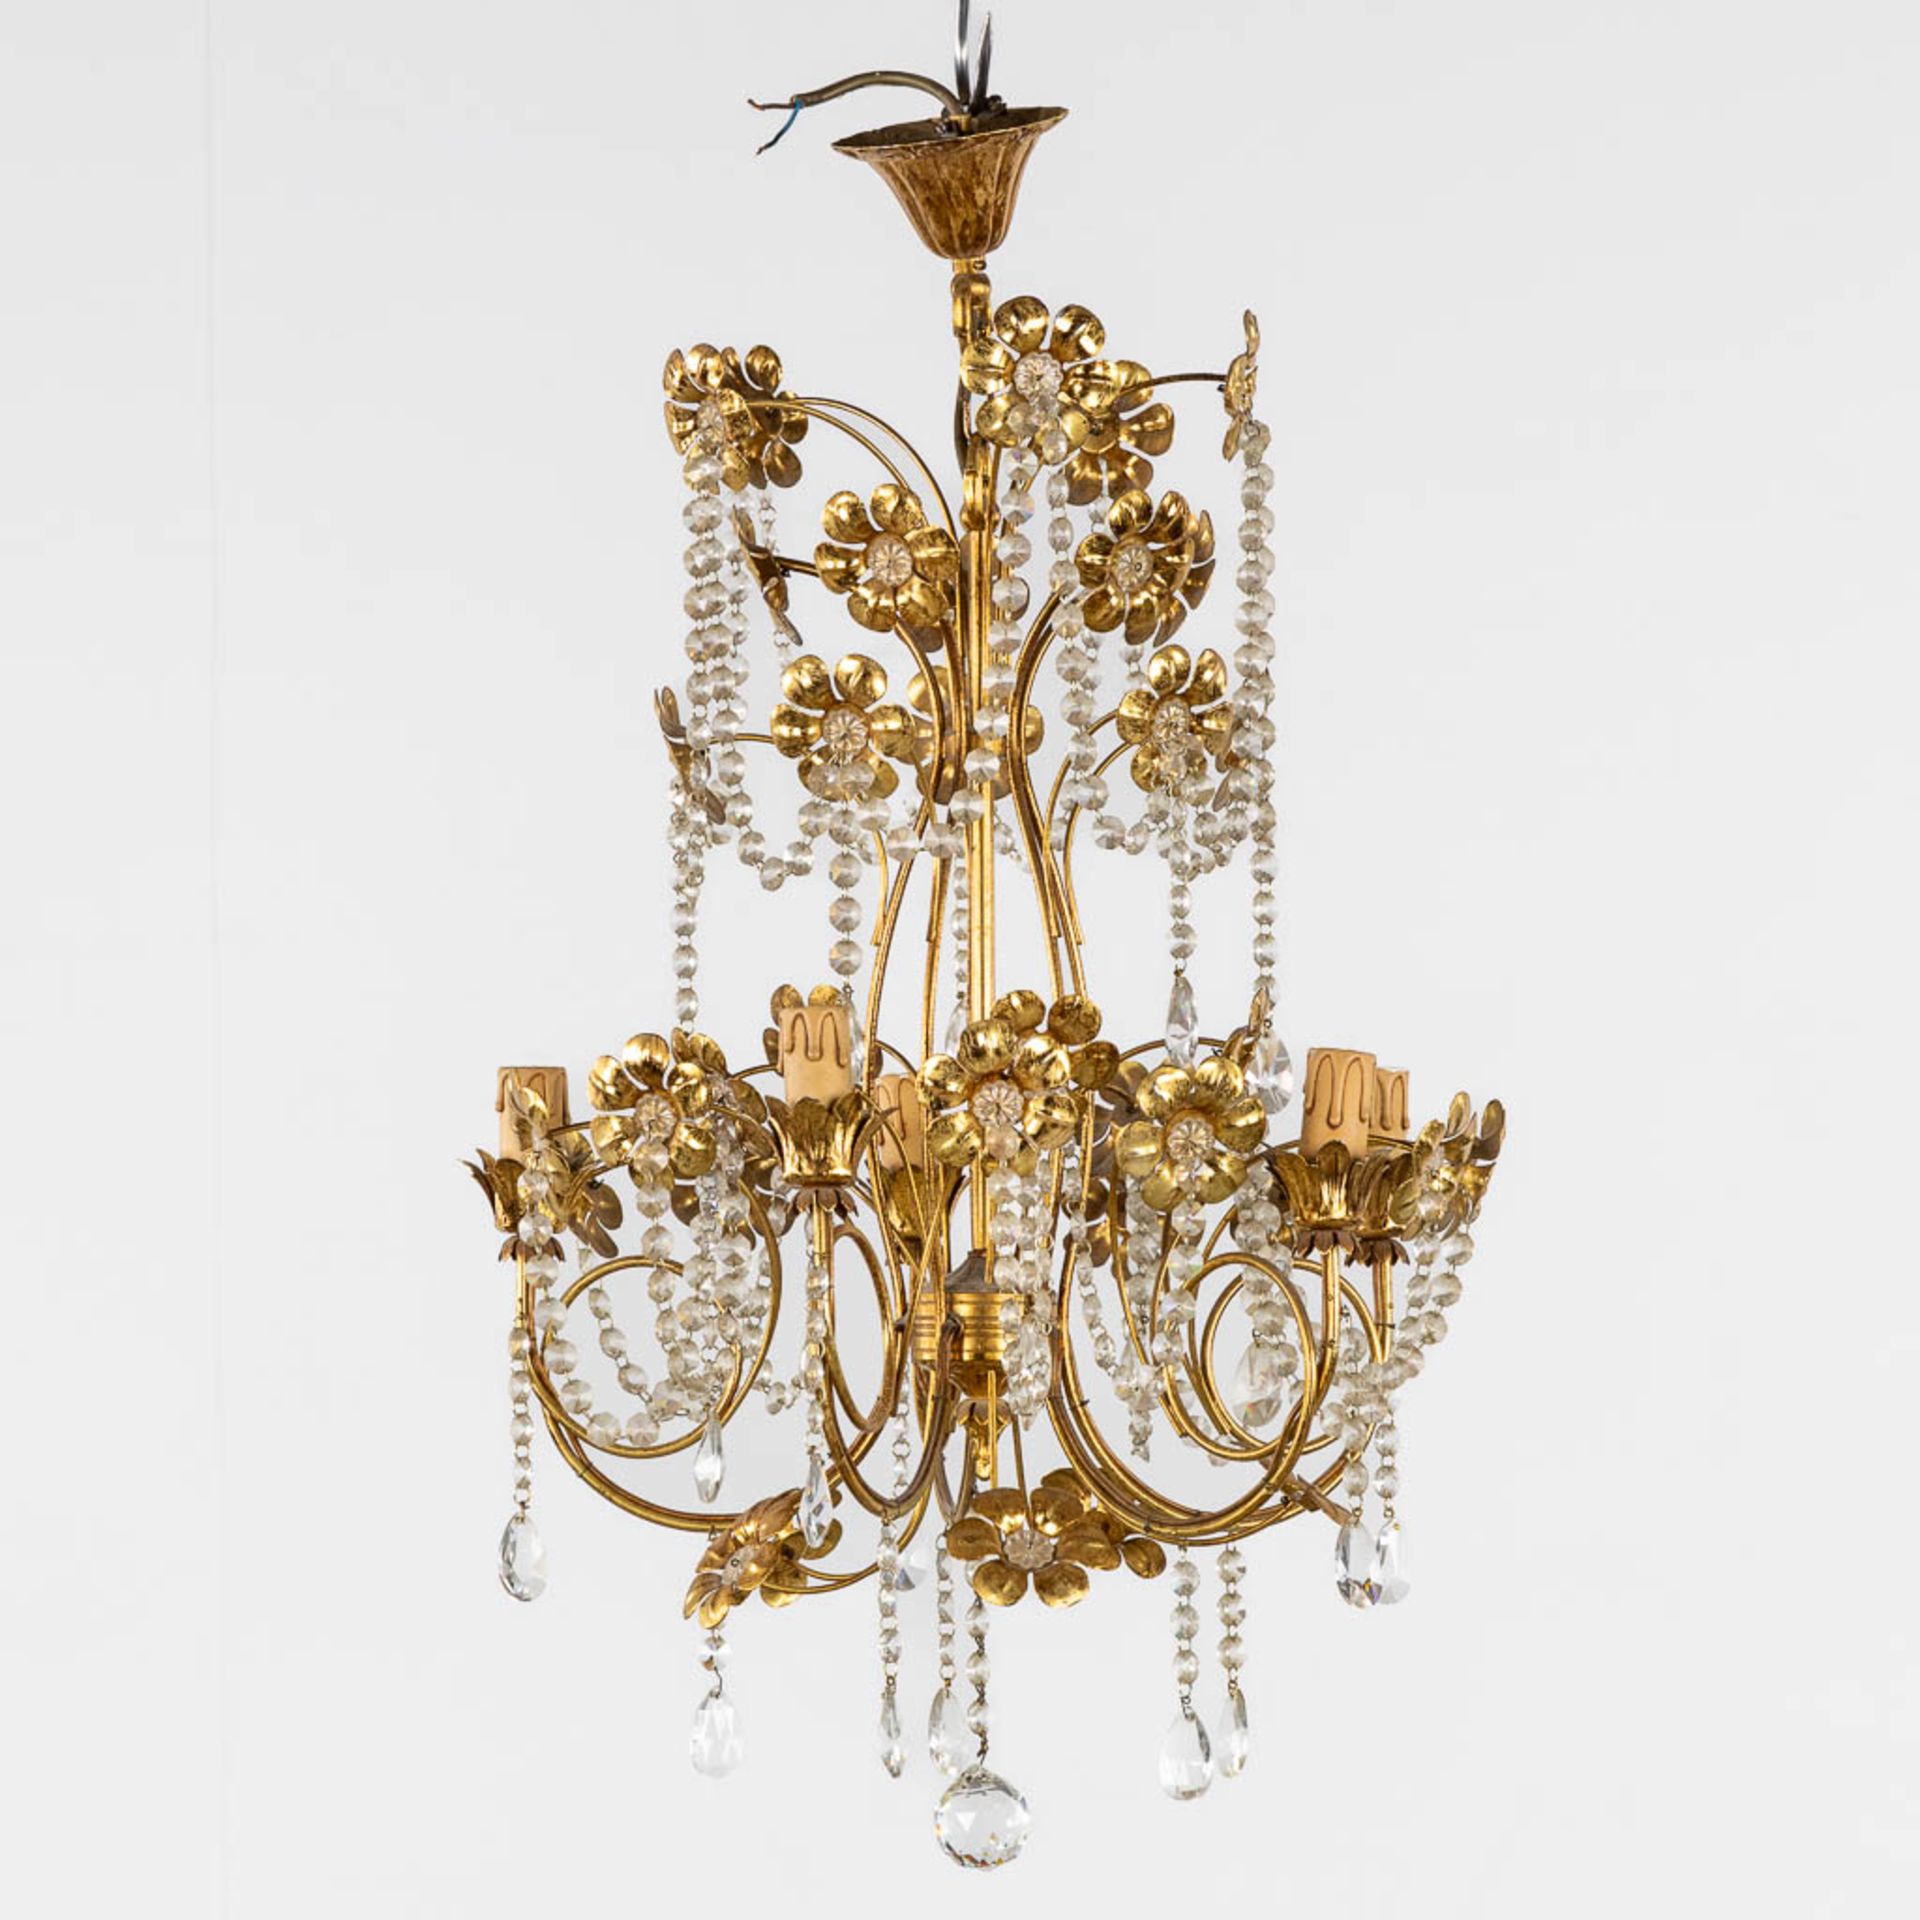 A decorative, floral hall lamp. Brass mounted with glass. 20th C. (H:74 x D:43 cm)